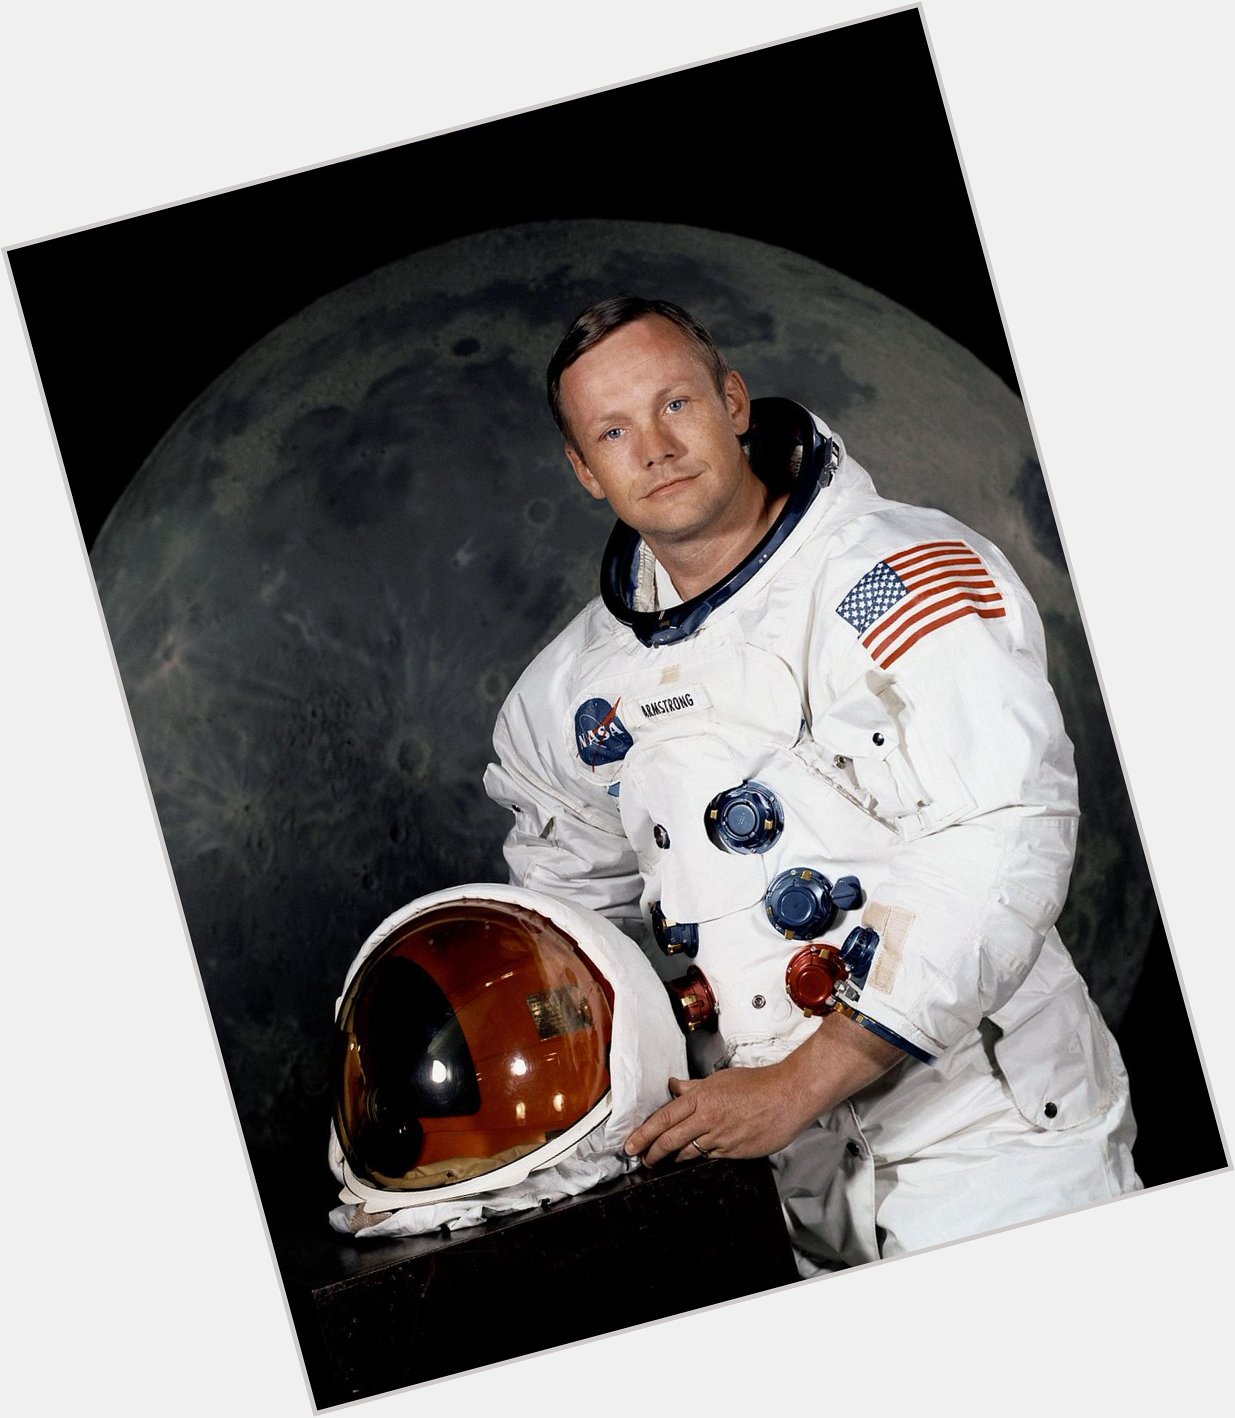 If today is your birthday, you share it with Neil Armstrong! Happy birthday to you! 